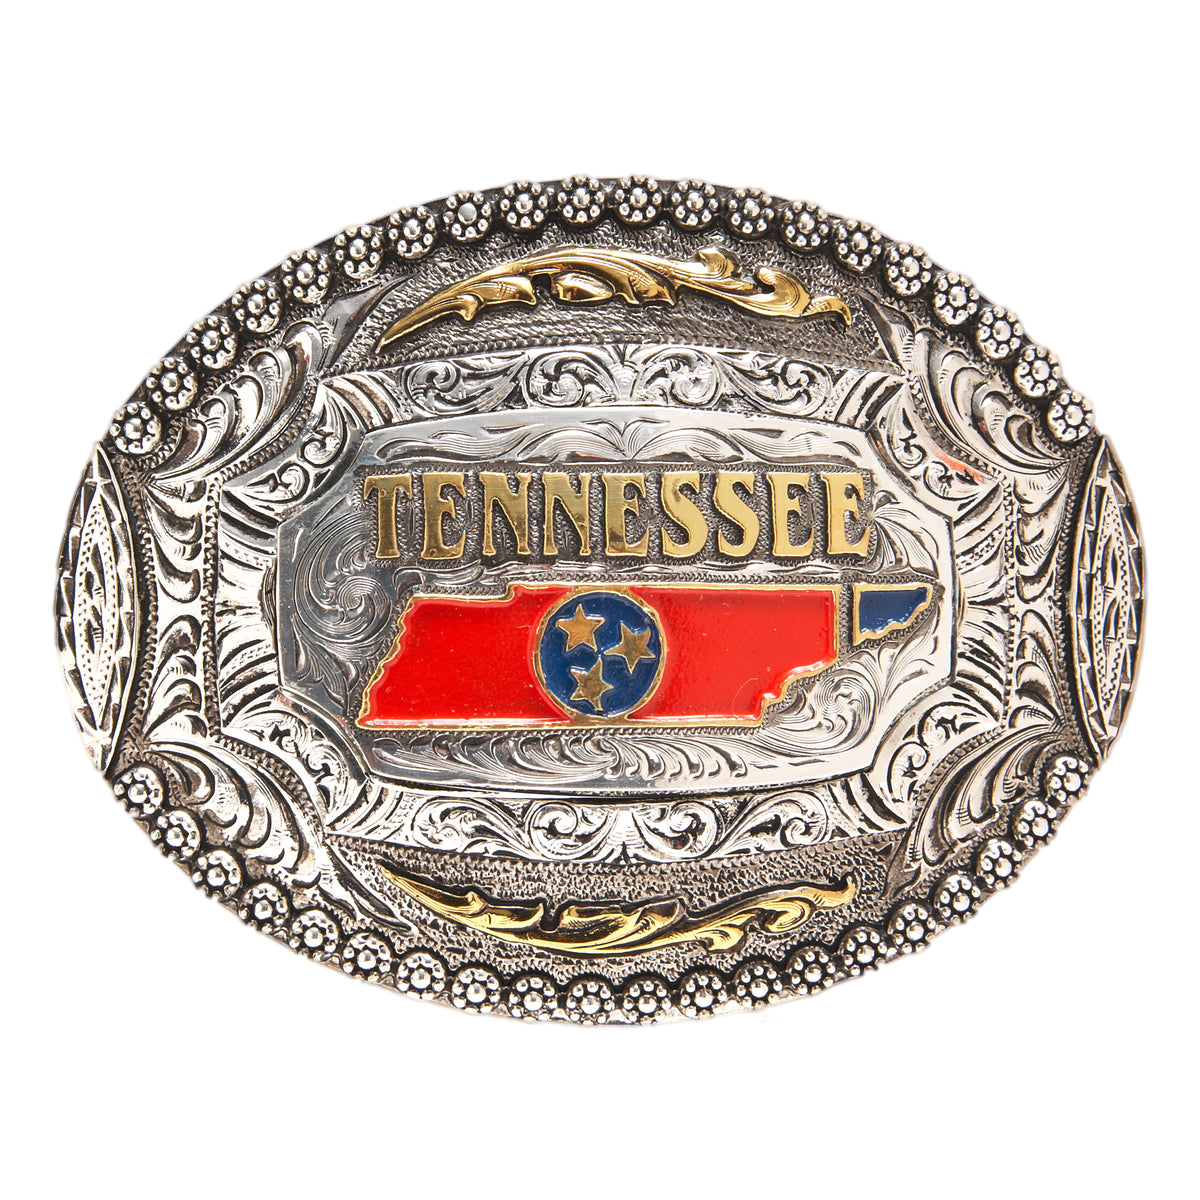 Tennessee State — Oval Berry Edge Buckle